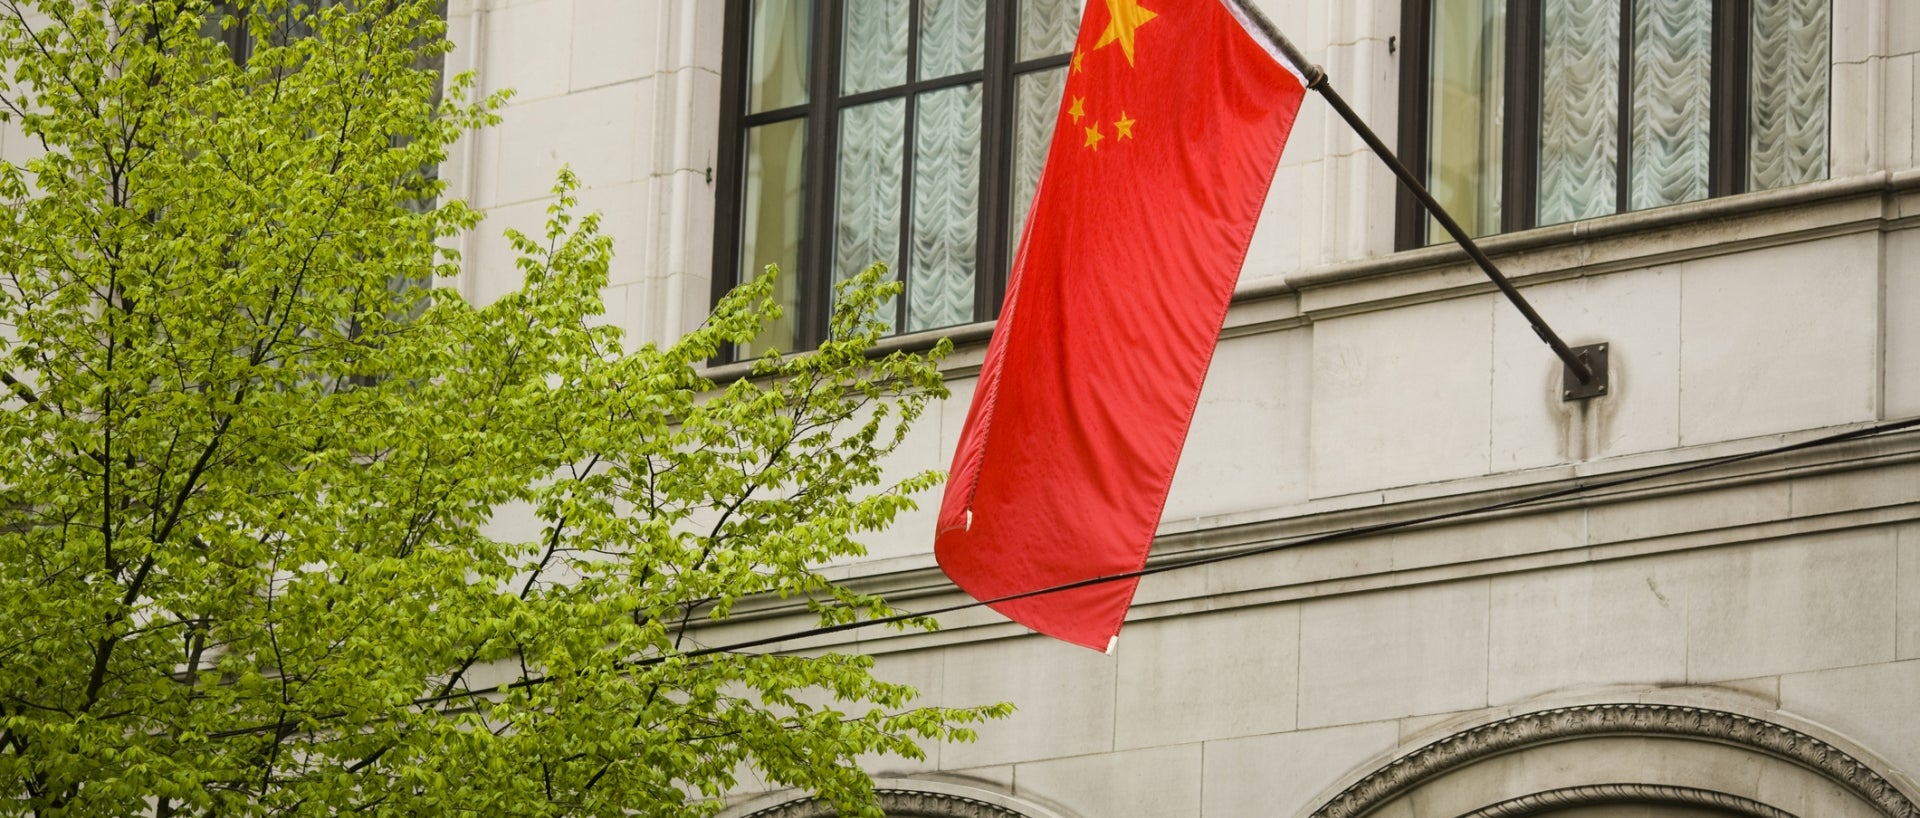 A Chinese flag hangs outside of a building.